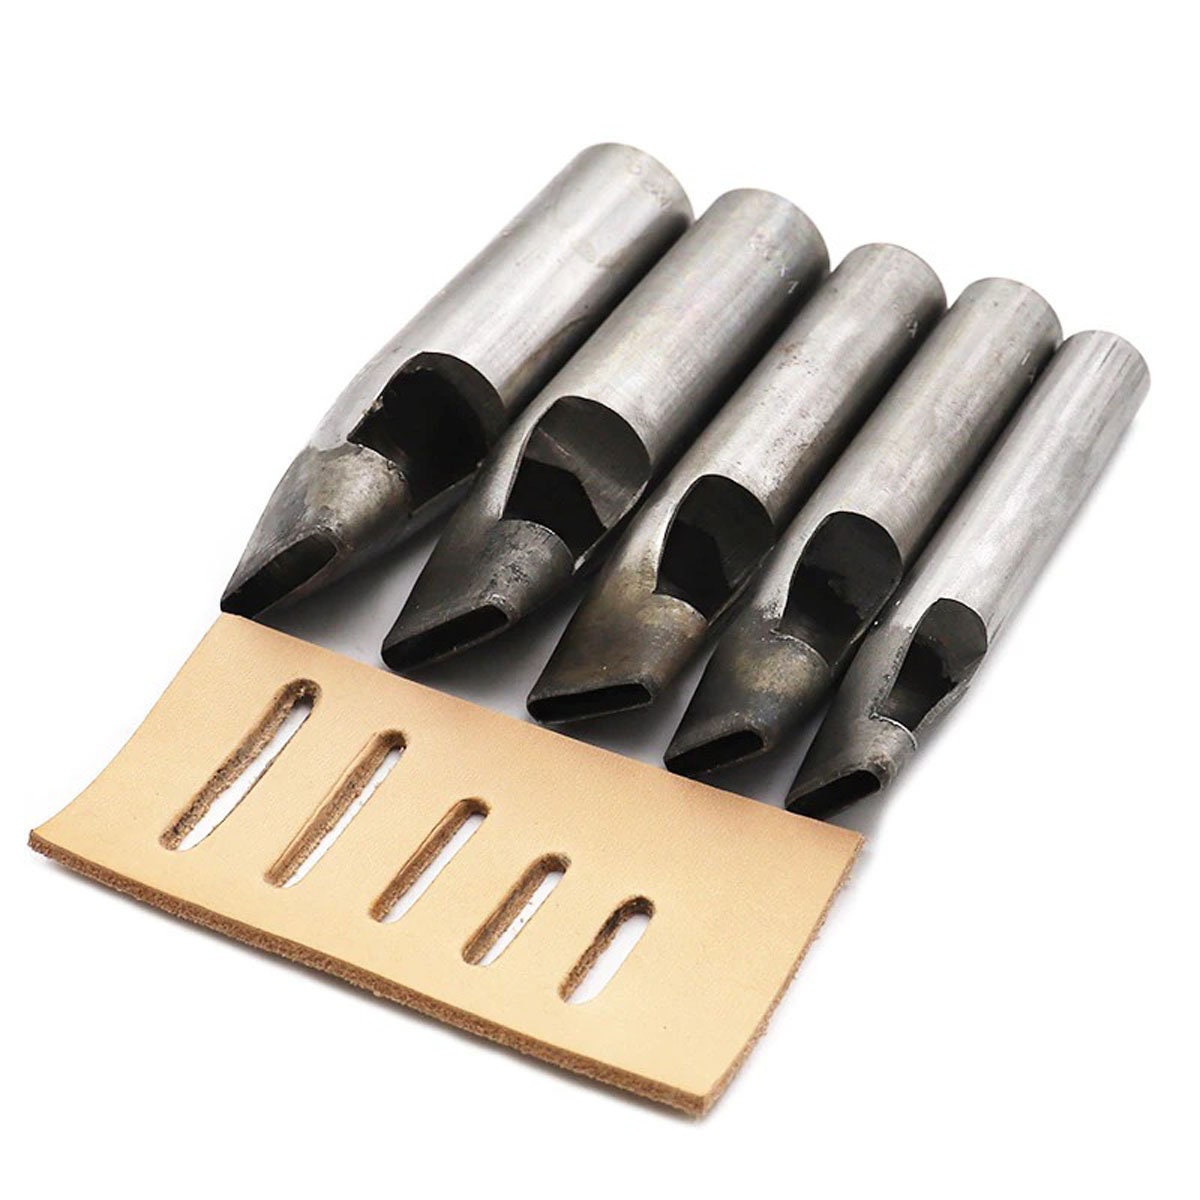 LMDZ Leather Oval Shape Hole Punch Oval Spacing Belt Punching Tools DIY  Craft Leather Puncher Hole Drilling Tool Color: 3mmx16mm